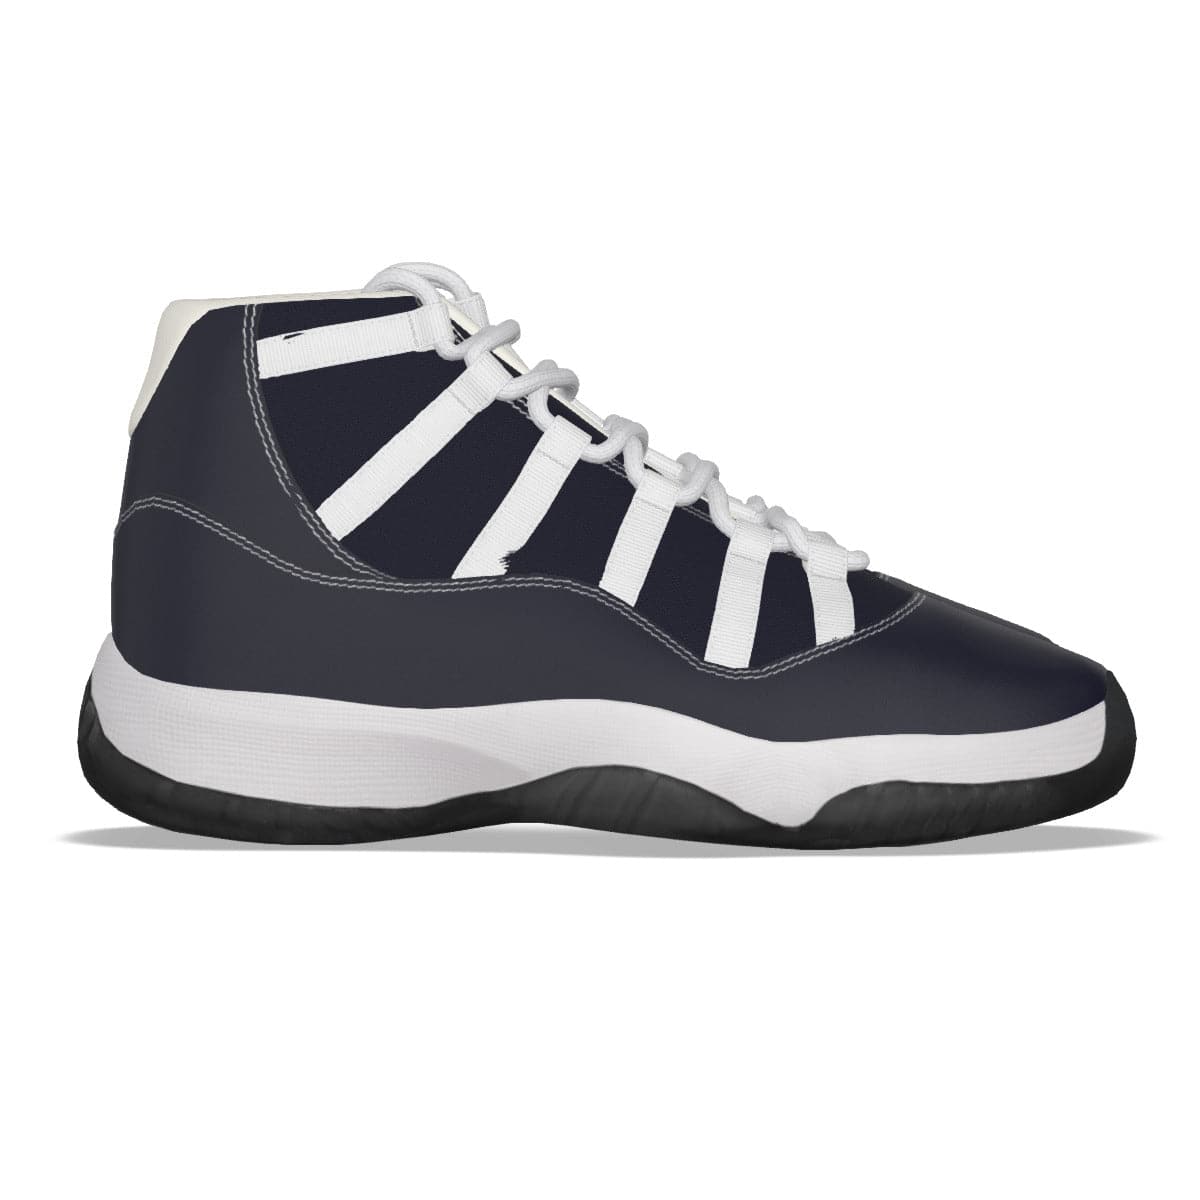 These Darker Blues High Top Basketball Shoe for Men Who Sport Outdoors by Senus Studio Design